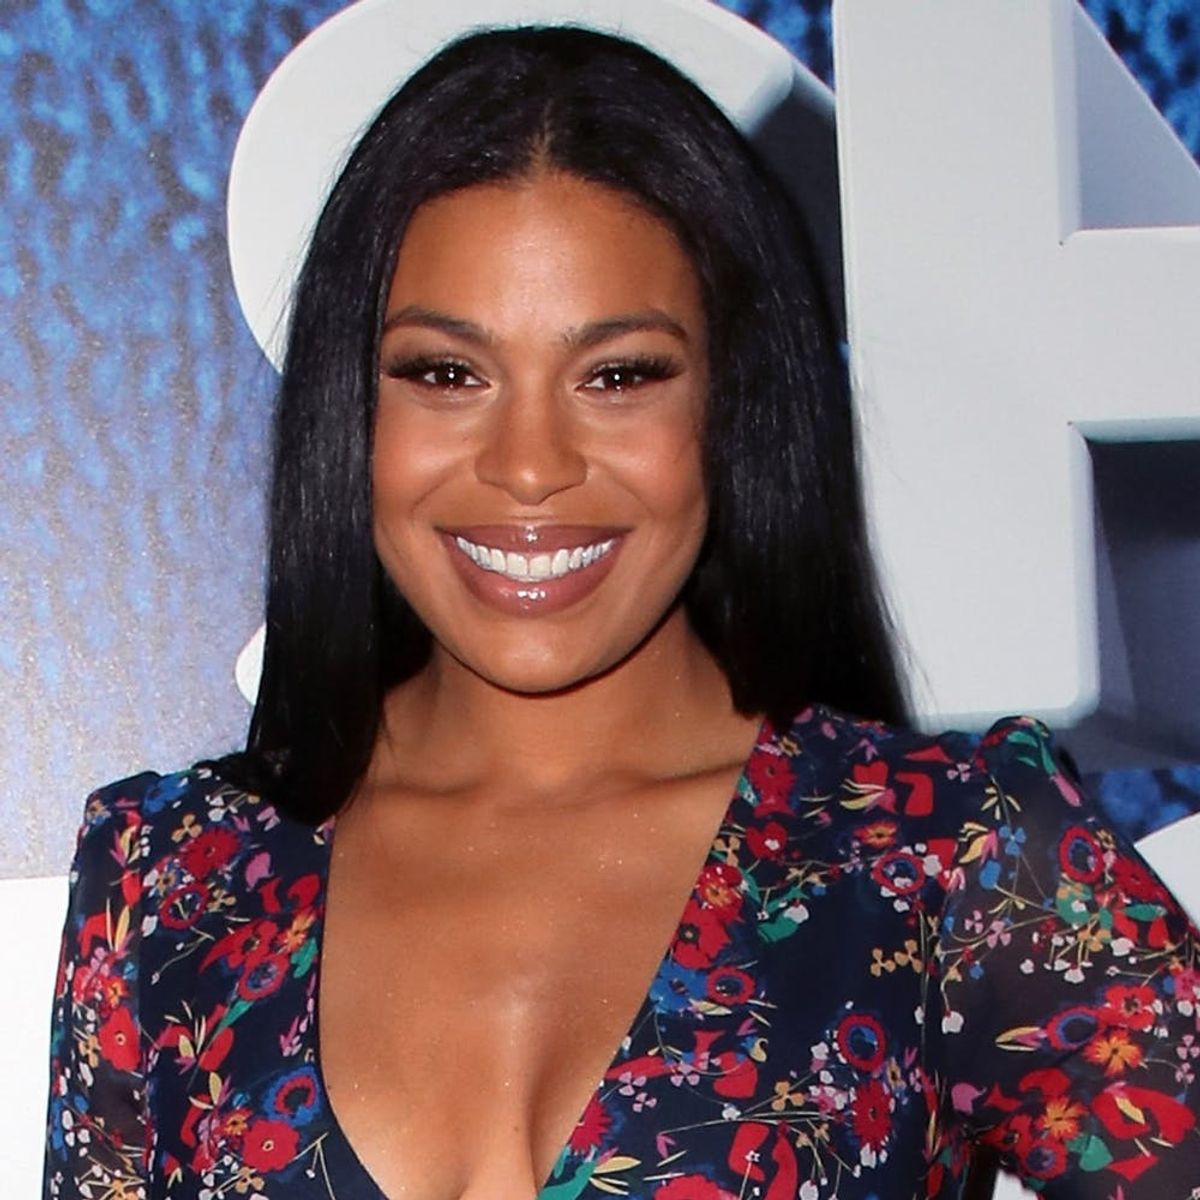 Jordin Sparks Opens Up About the Scary Complication During Her Son’s Birth